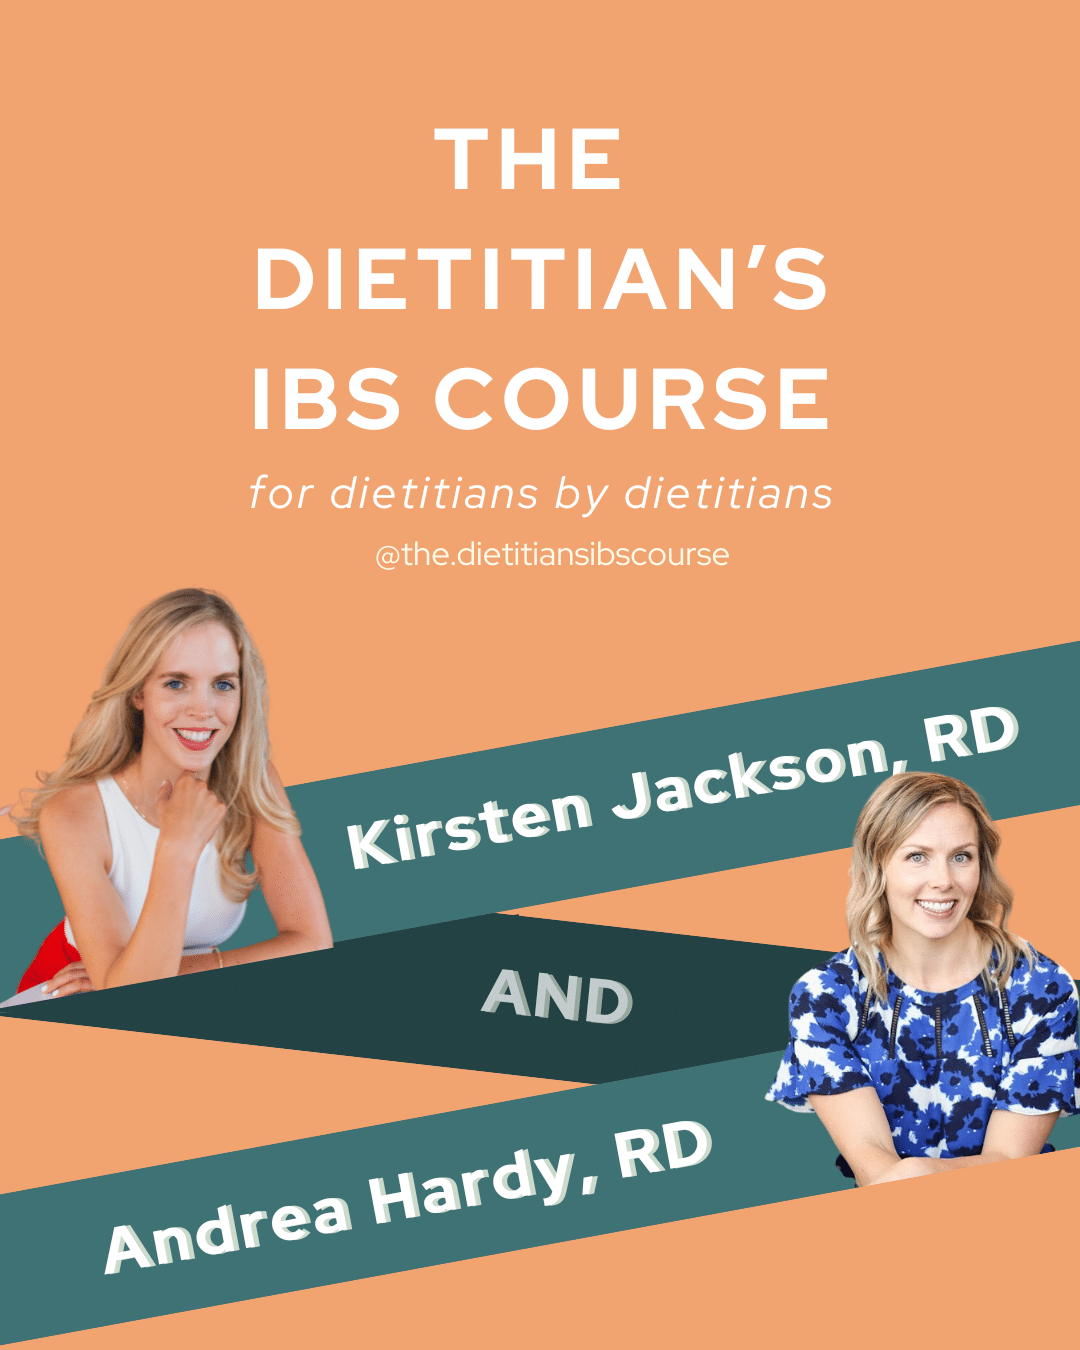 THE DIETITIAN’S IBS COURSE